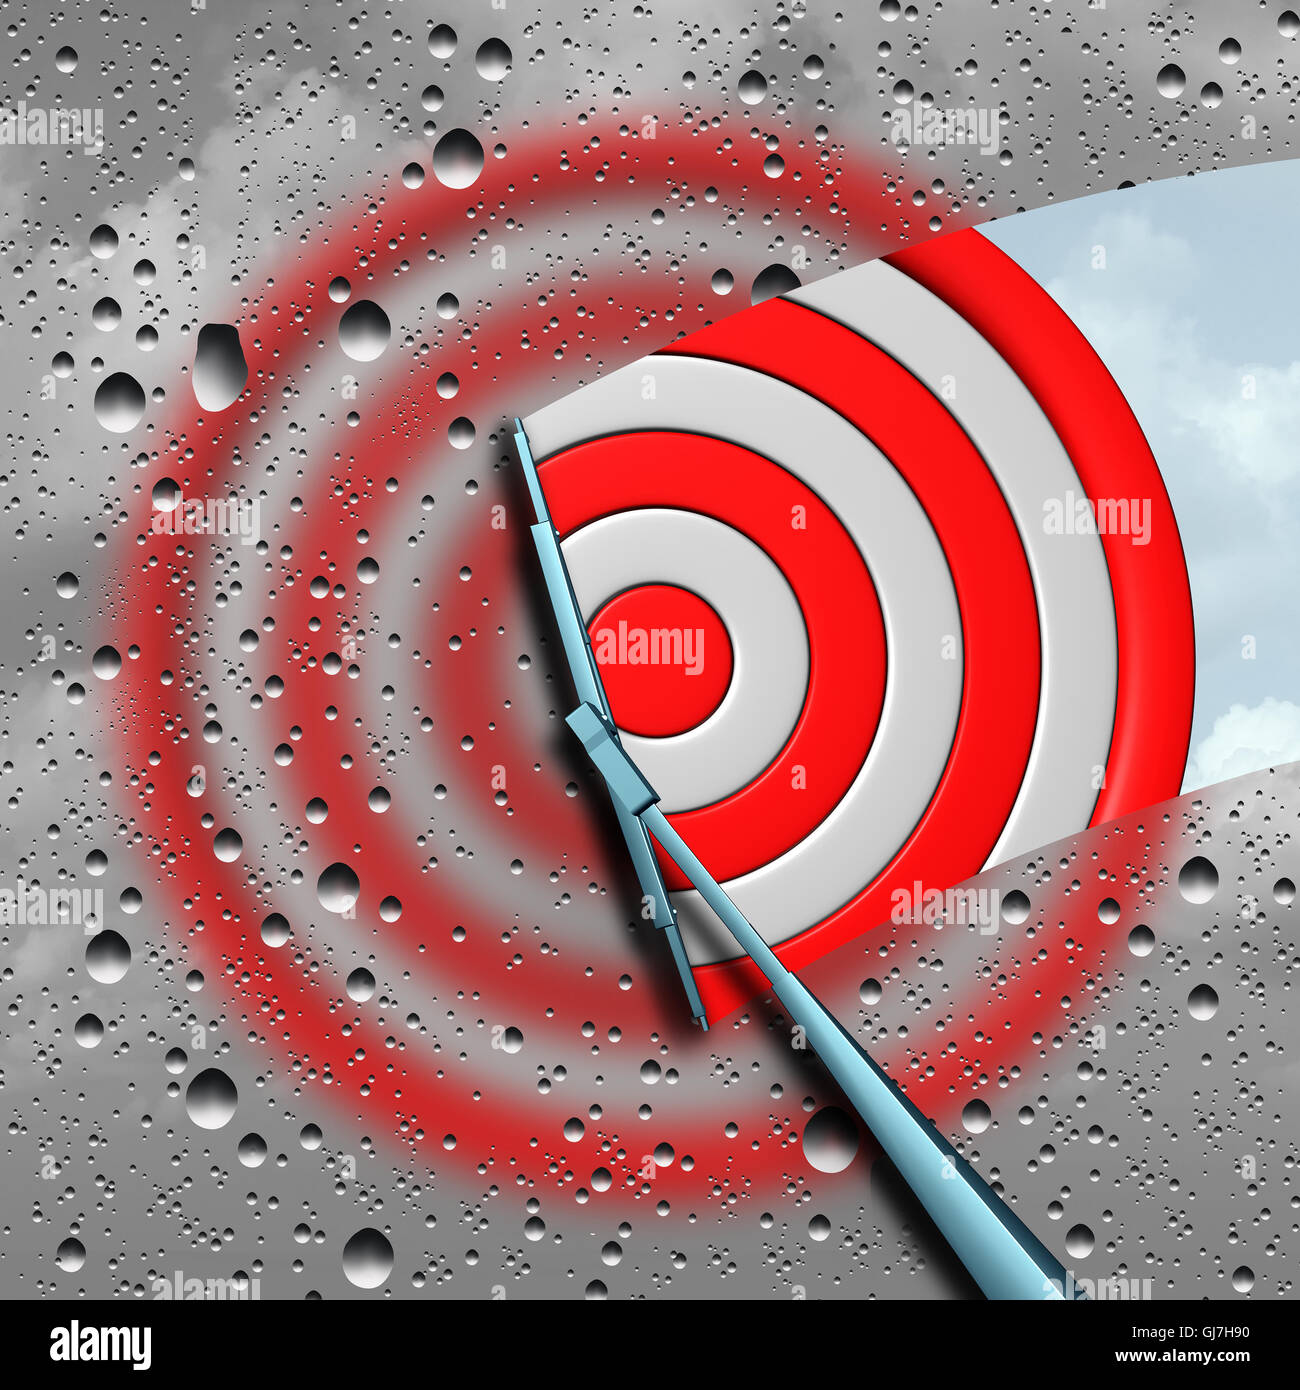 Concept of target as a blurry wet bulls eye dart target board being cleaned by a wiper as a business metaphor for clear focus or focused aim icon as a 3D illustration. Stock Photo